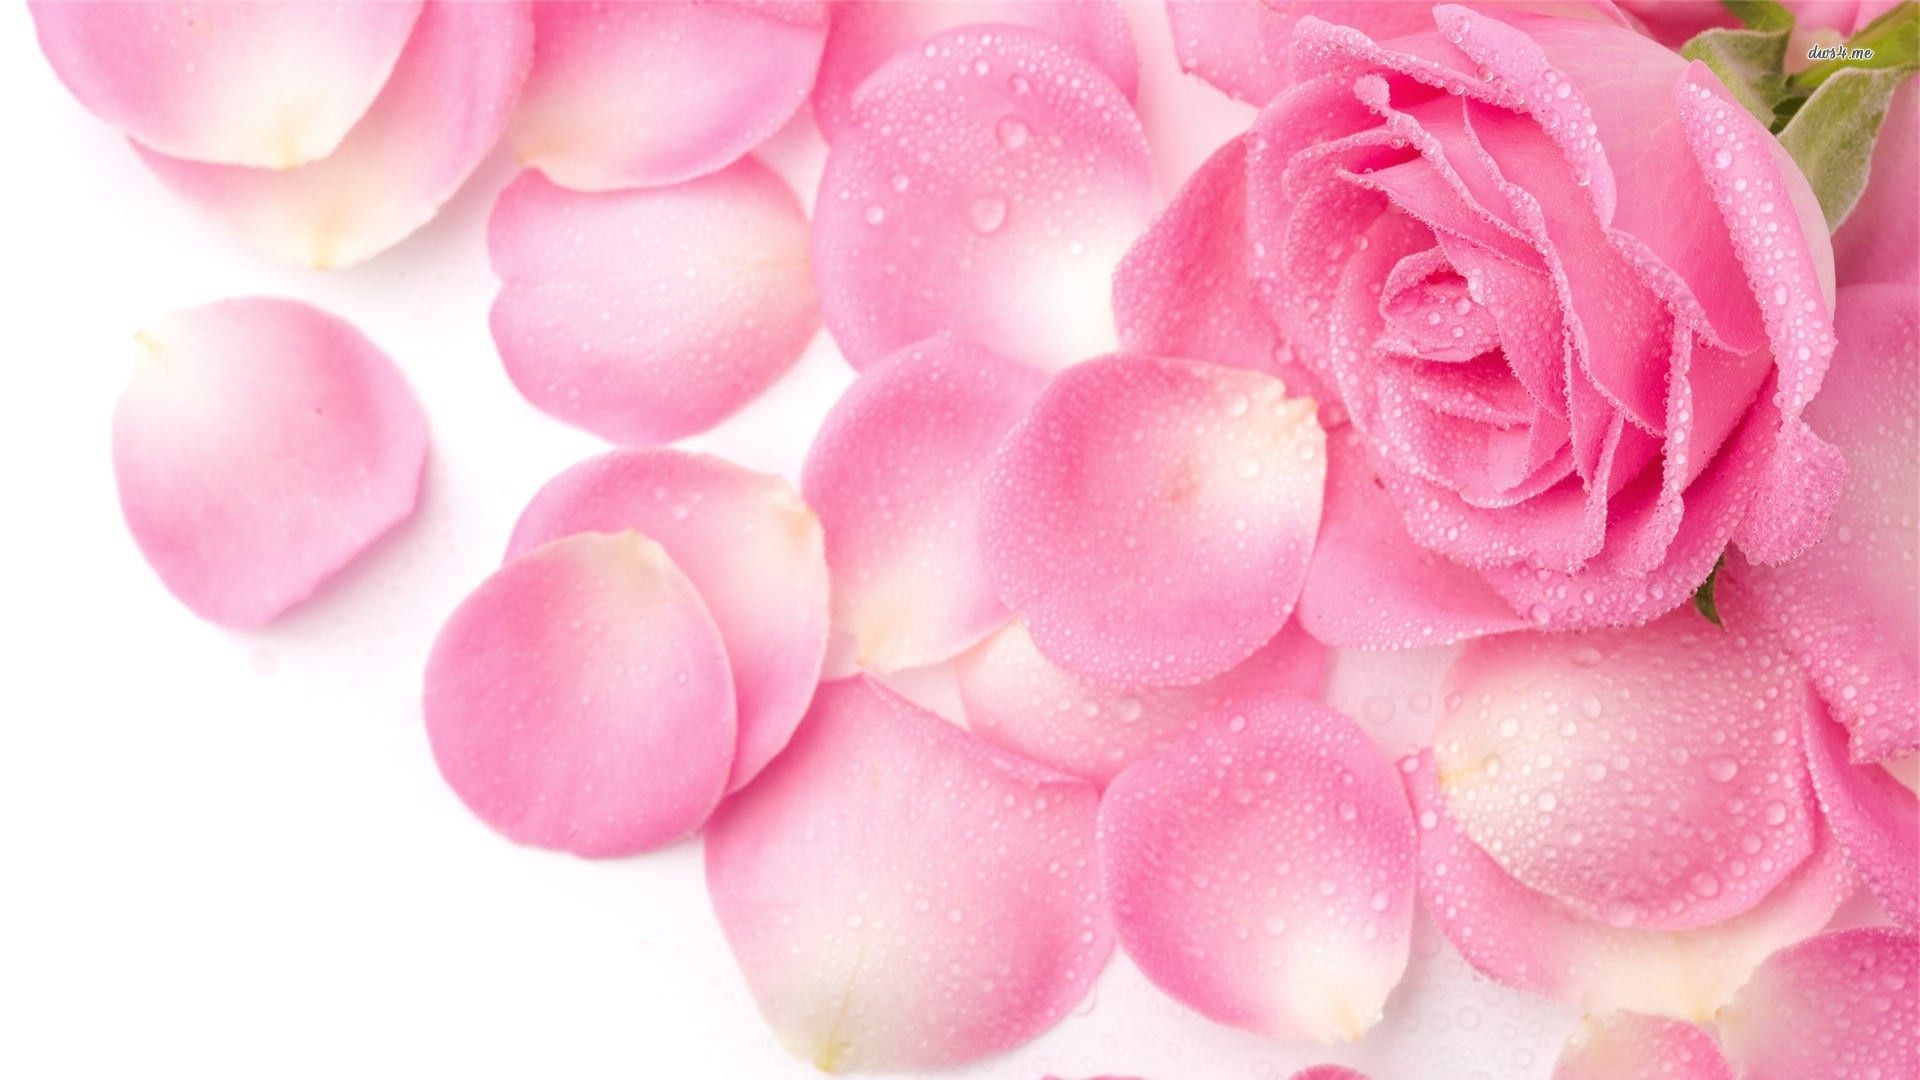 Flowers & Rose Petals Wallpapers HD Pictures | One HD Wallpaper ...